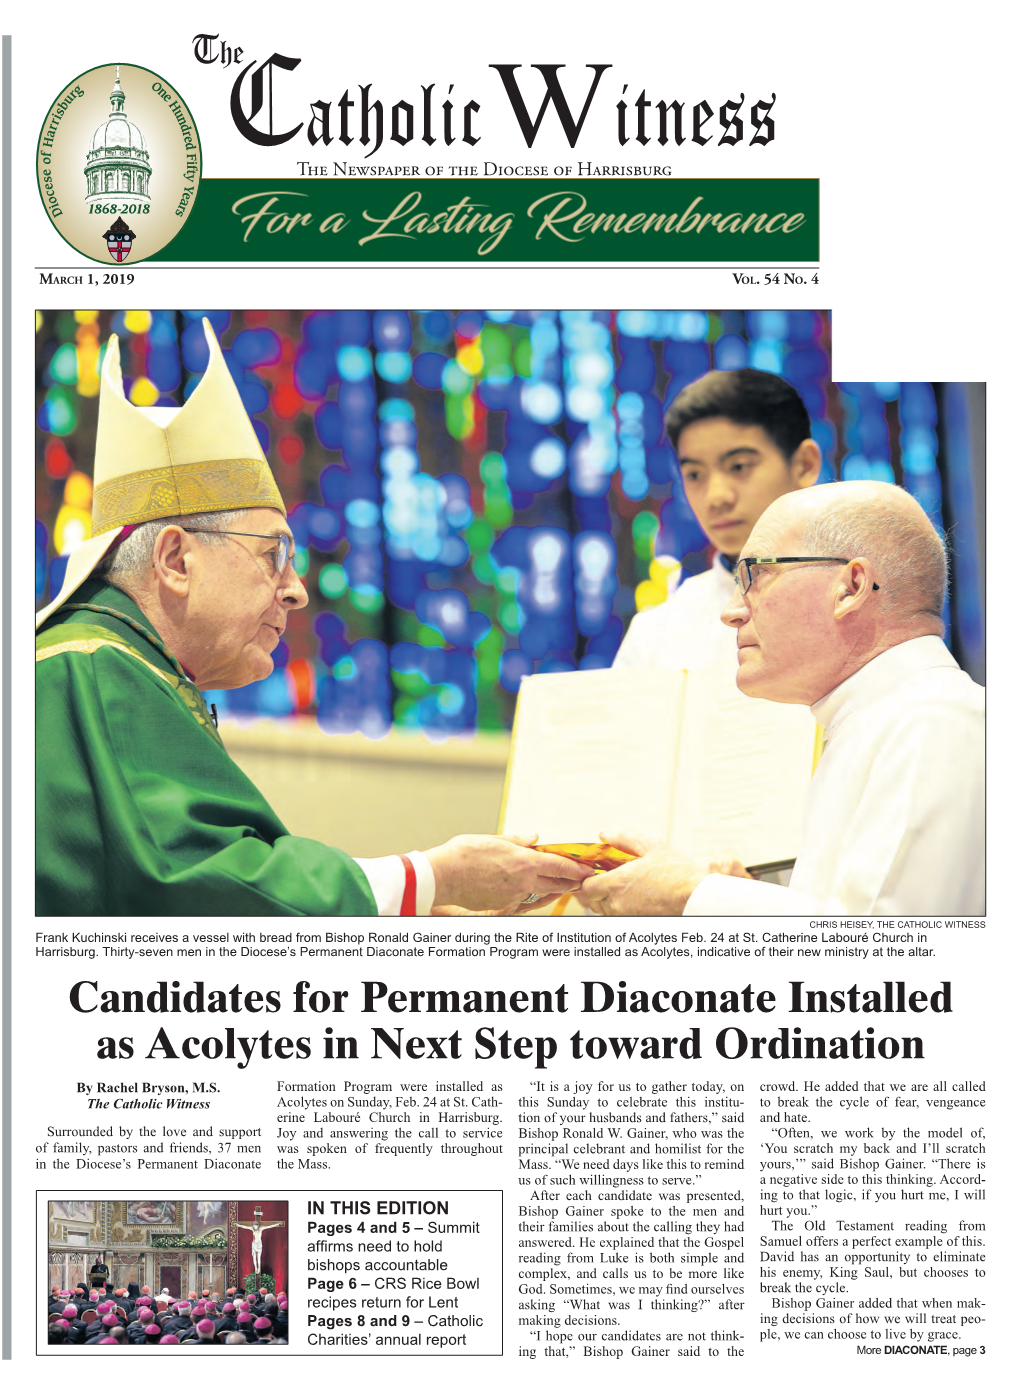 Candidates for Permanent Diaconate Installed As Acolytes in Next Step